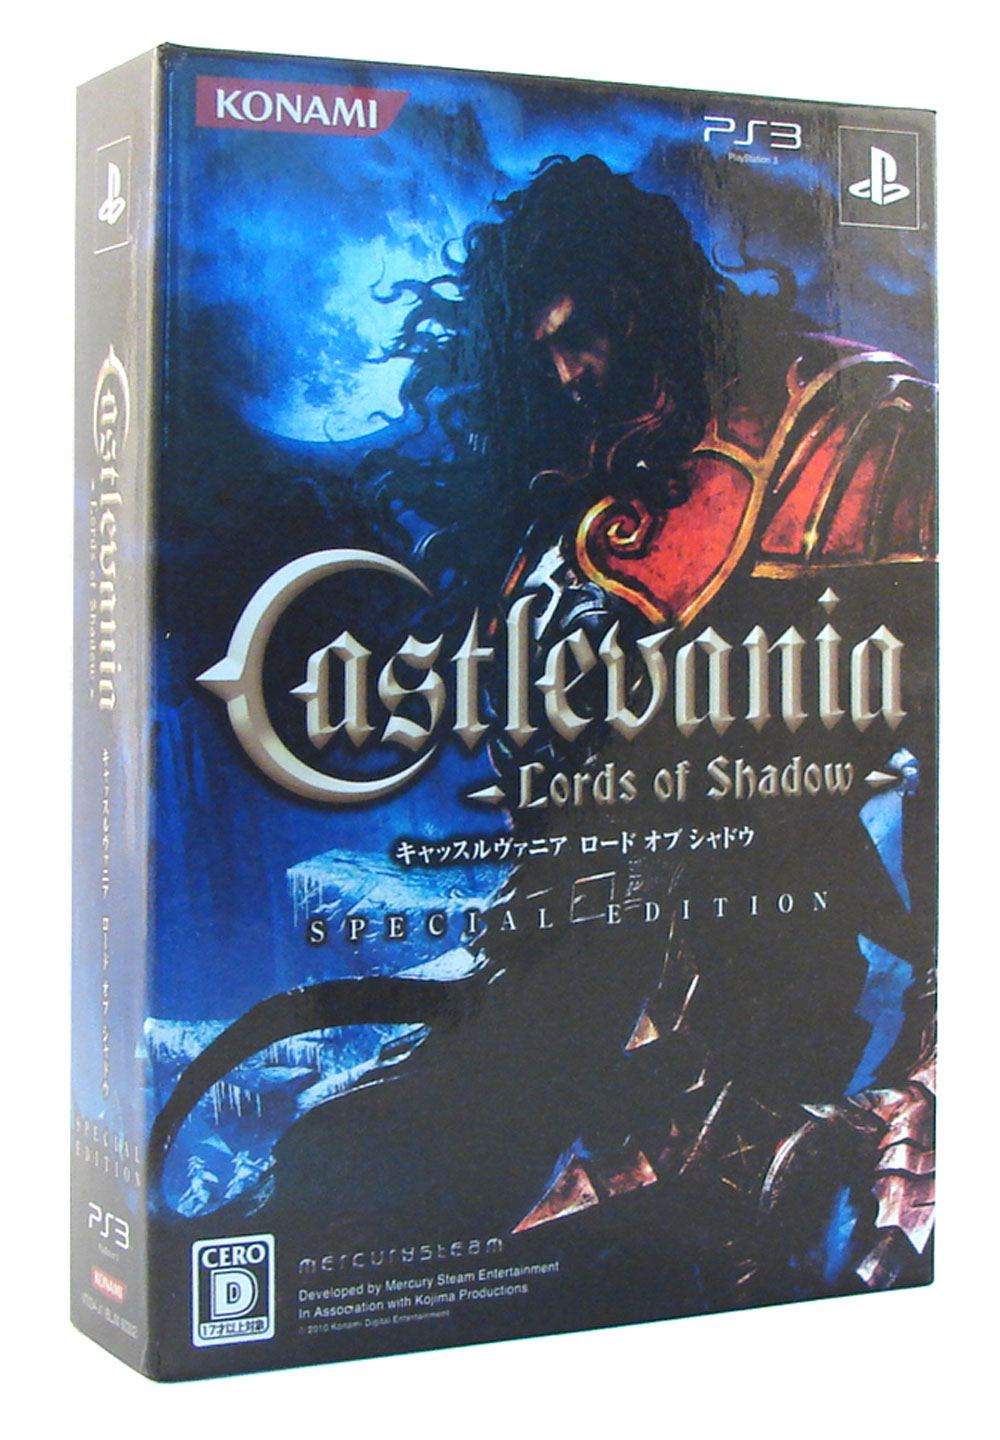 The Art of Castlevania: Lords of Shadow 